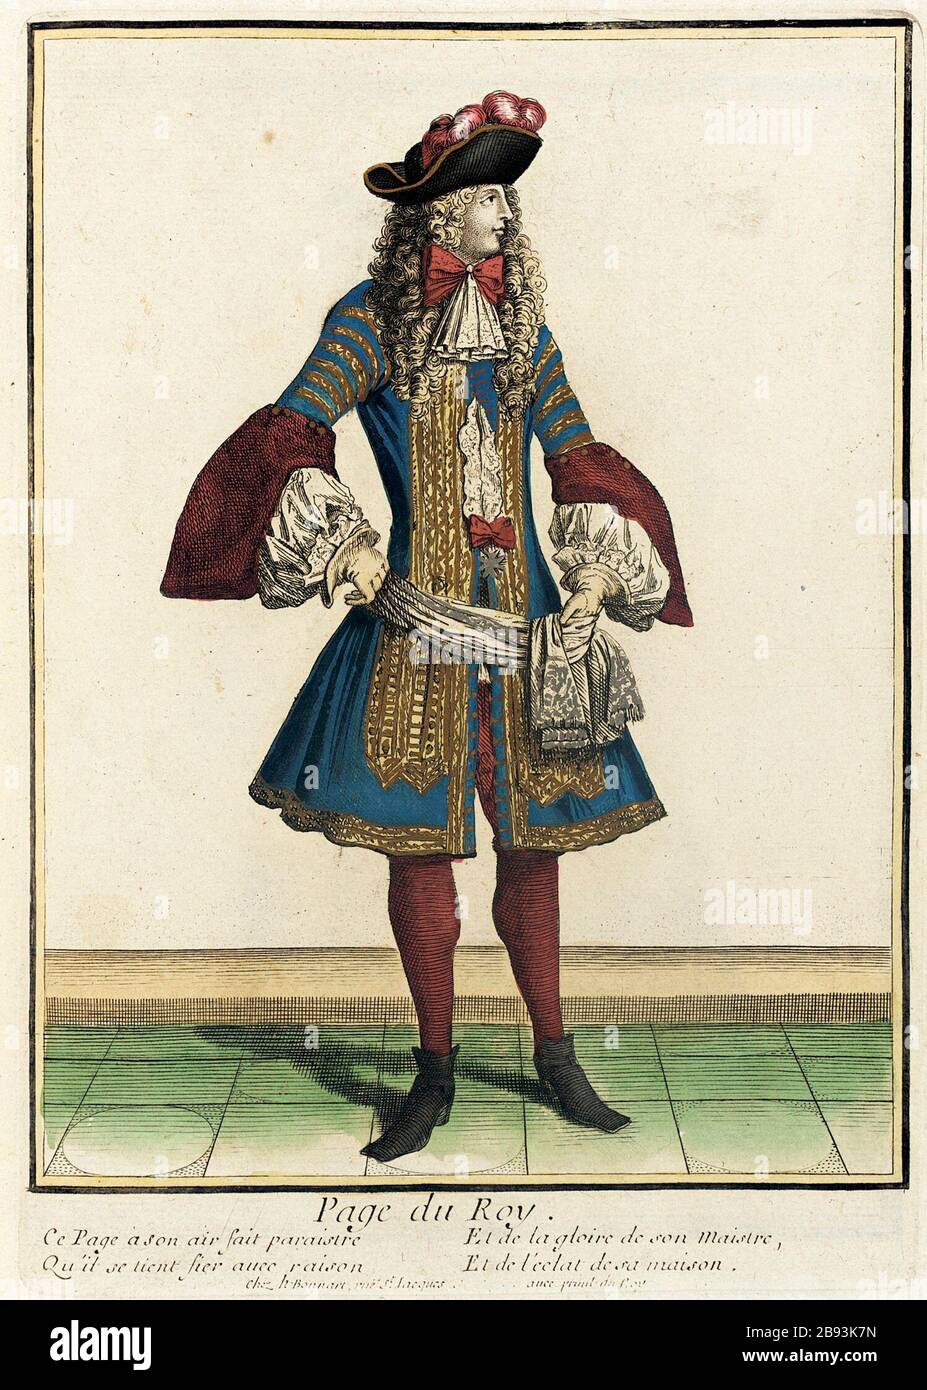 'Recueil des modes de la cour de France, 'Page du Roy'; English:  France, Paris, 1675 Prints Hand-colored engraving on paper Sheet:  14 3/8 x 9 3/8 in. (36.51 x 23.81 cm); Composition:  10 x 7 in. (25.4 x 17.78 cm) Purchased with funds provided by The Eli and Edythe L. Broad Foundation, Mr. and Mrs. H. Tony Oppenheimer, Mr. and Mrs. Reed Oppenheimer, Hal Oppenheimer, Alice and Nahum Lainer, Mr. and Mrs. Gerald Oppenheimer, Ricki and Marvin Ring, Mr. and Mrs. David Sydorick, the Costume Council Fund, and member of the Costume Council (M.2002.57.91) Costume and Textiles; 1675date QS:P571,+1675-0 Stock Photo